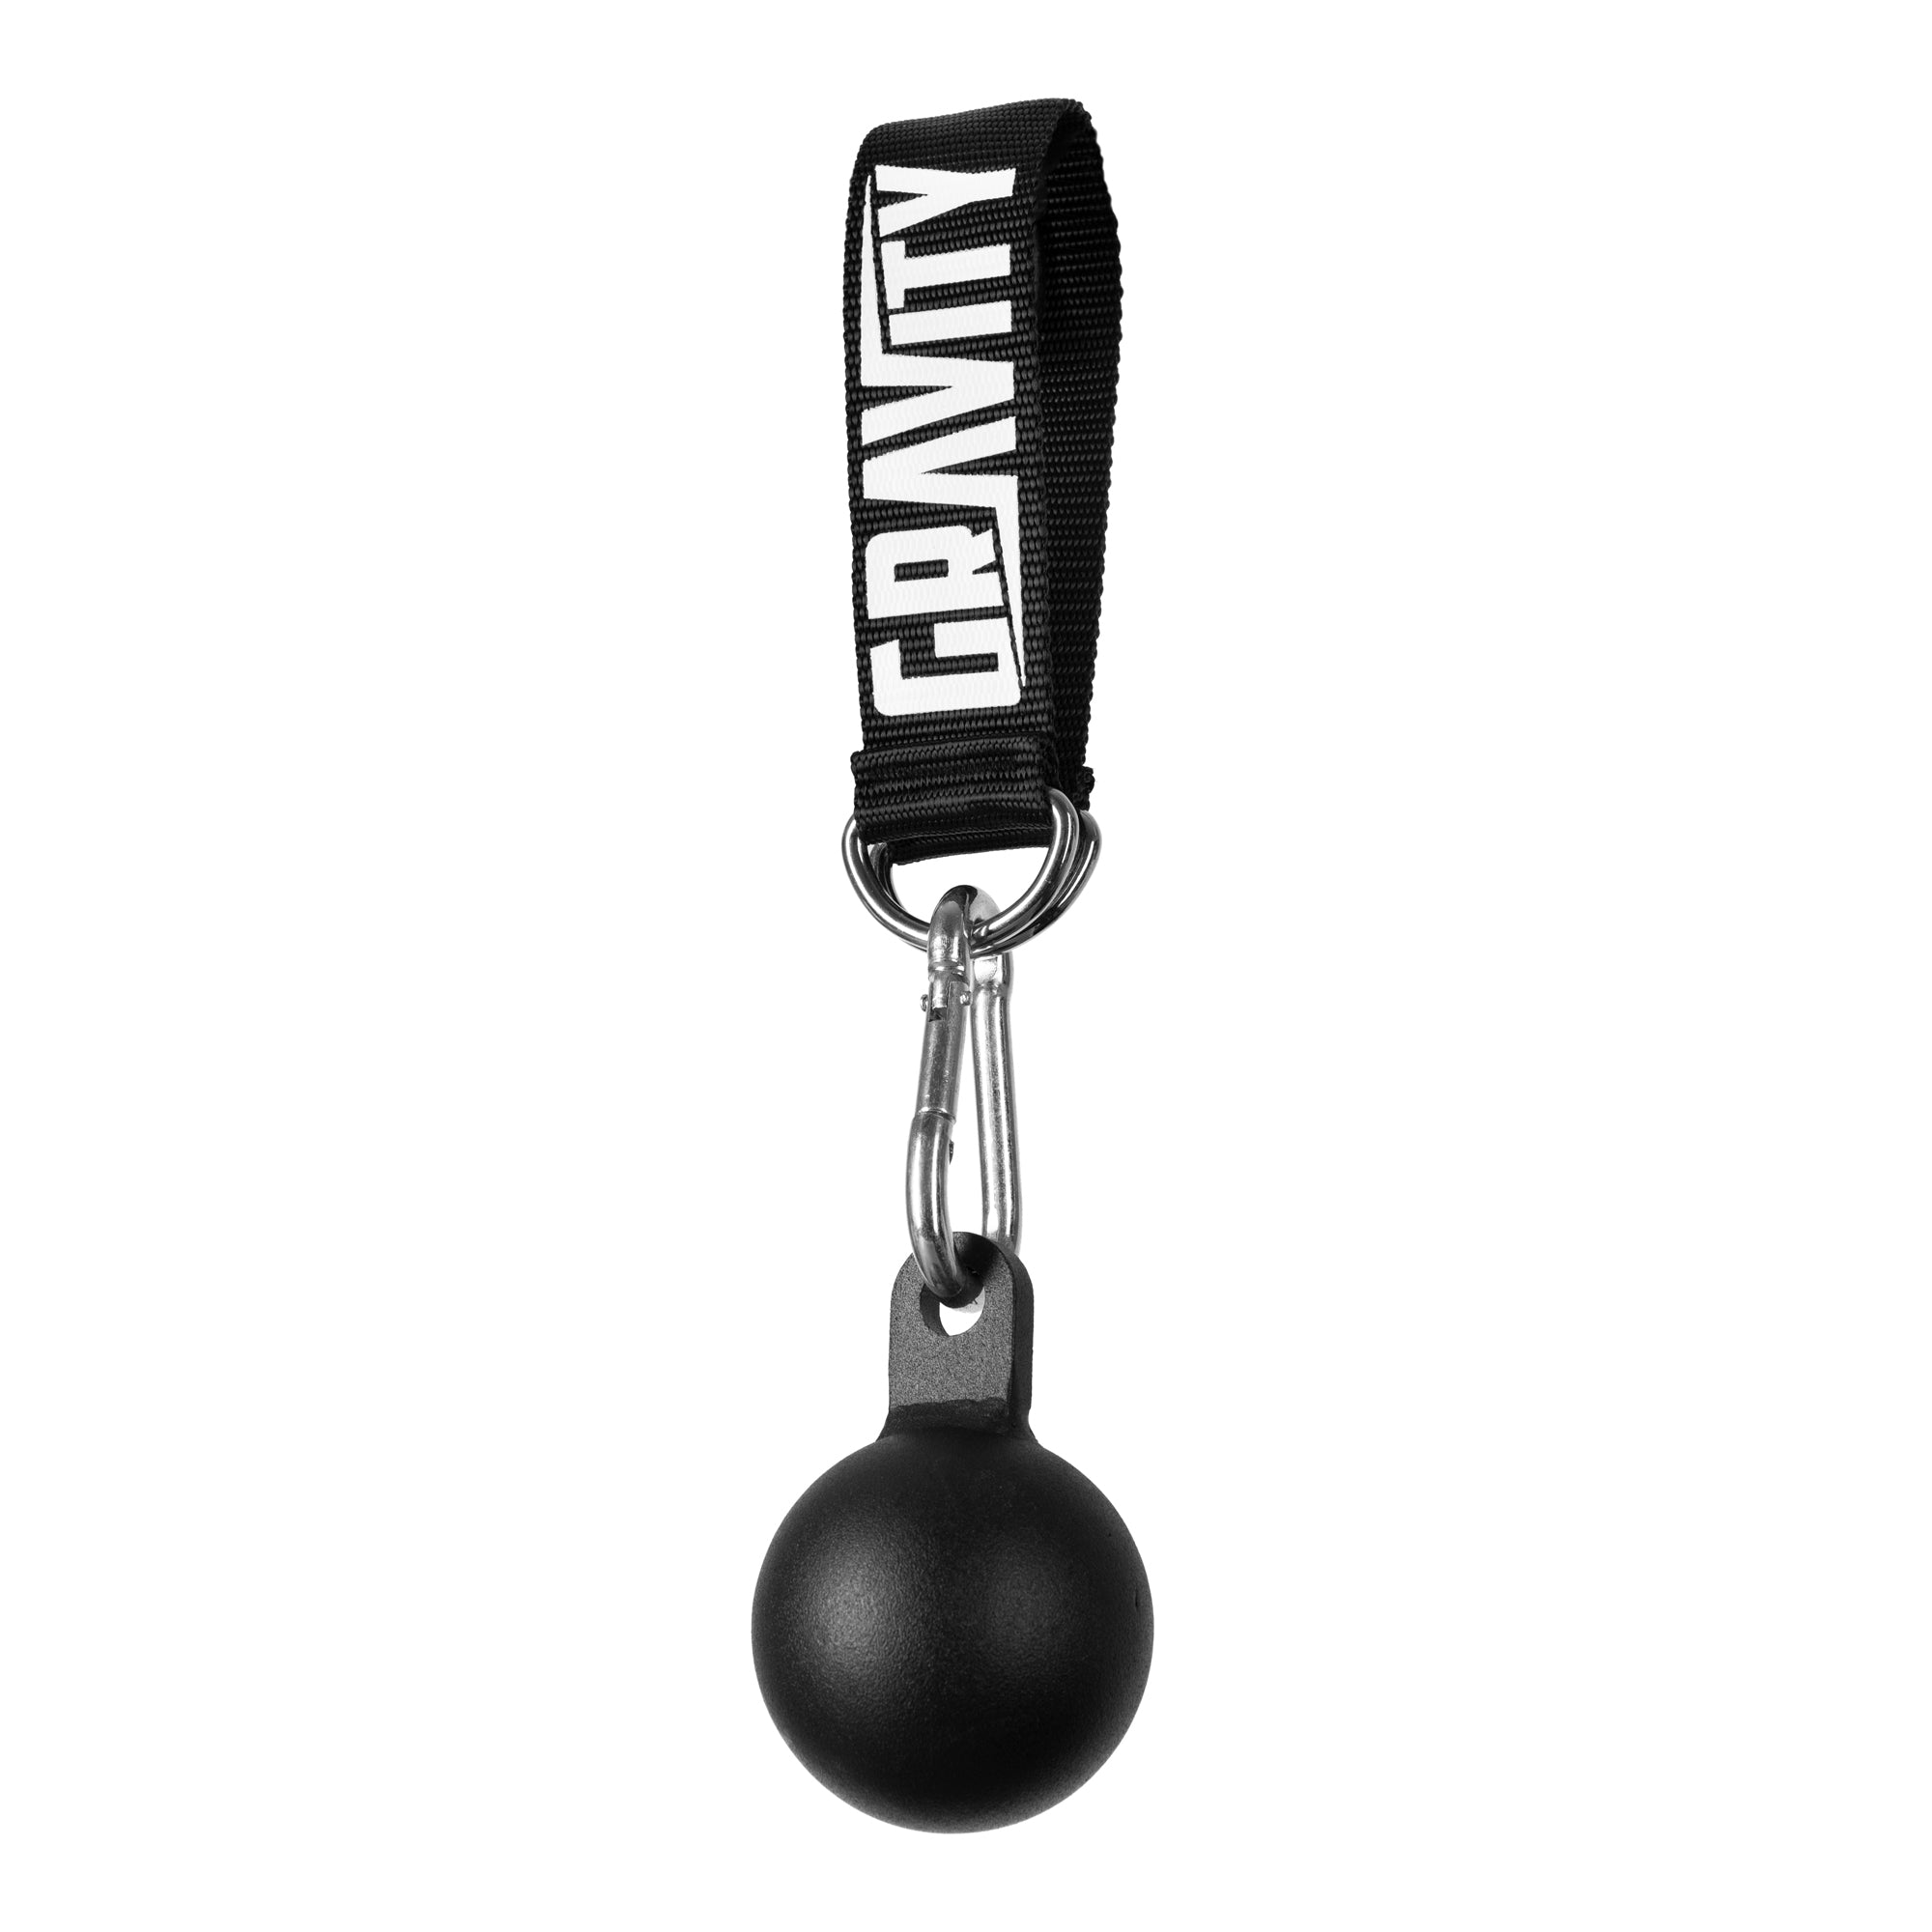 Gravity Fitness 120mm Cannonball Pull Up Grips